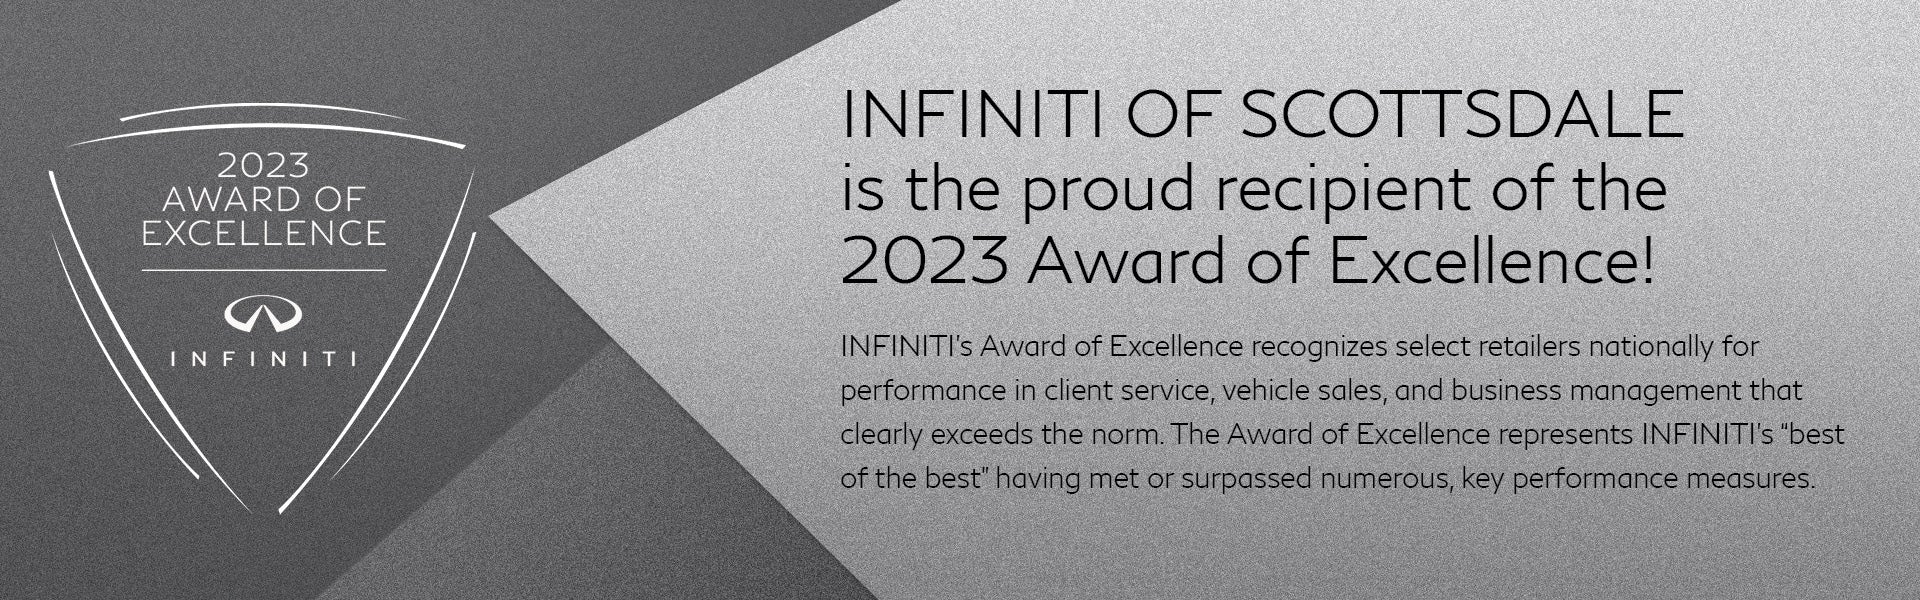 Infiniti Award of Excellence